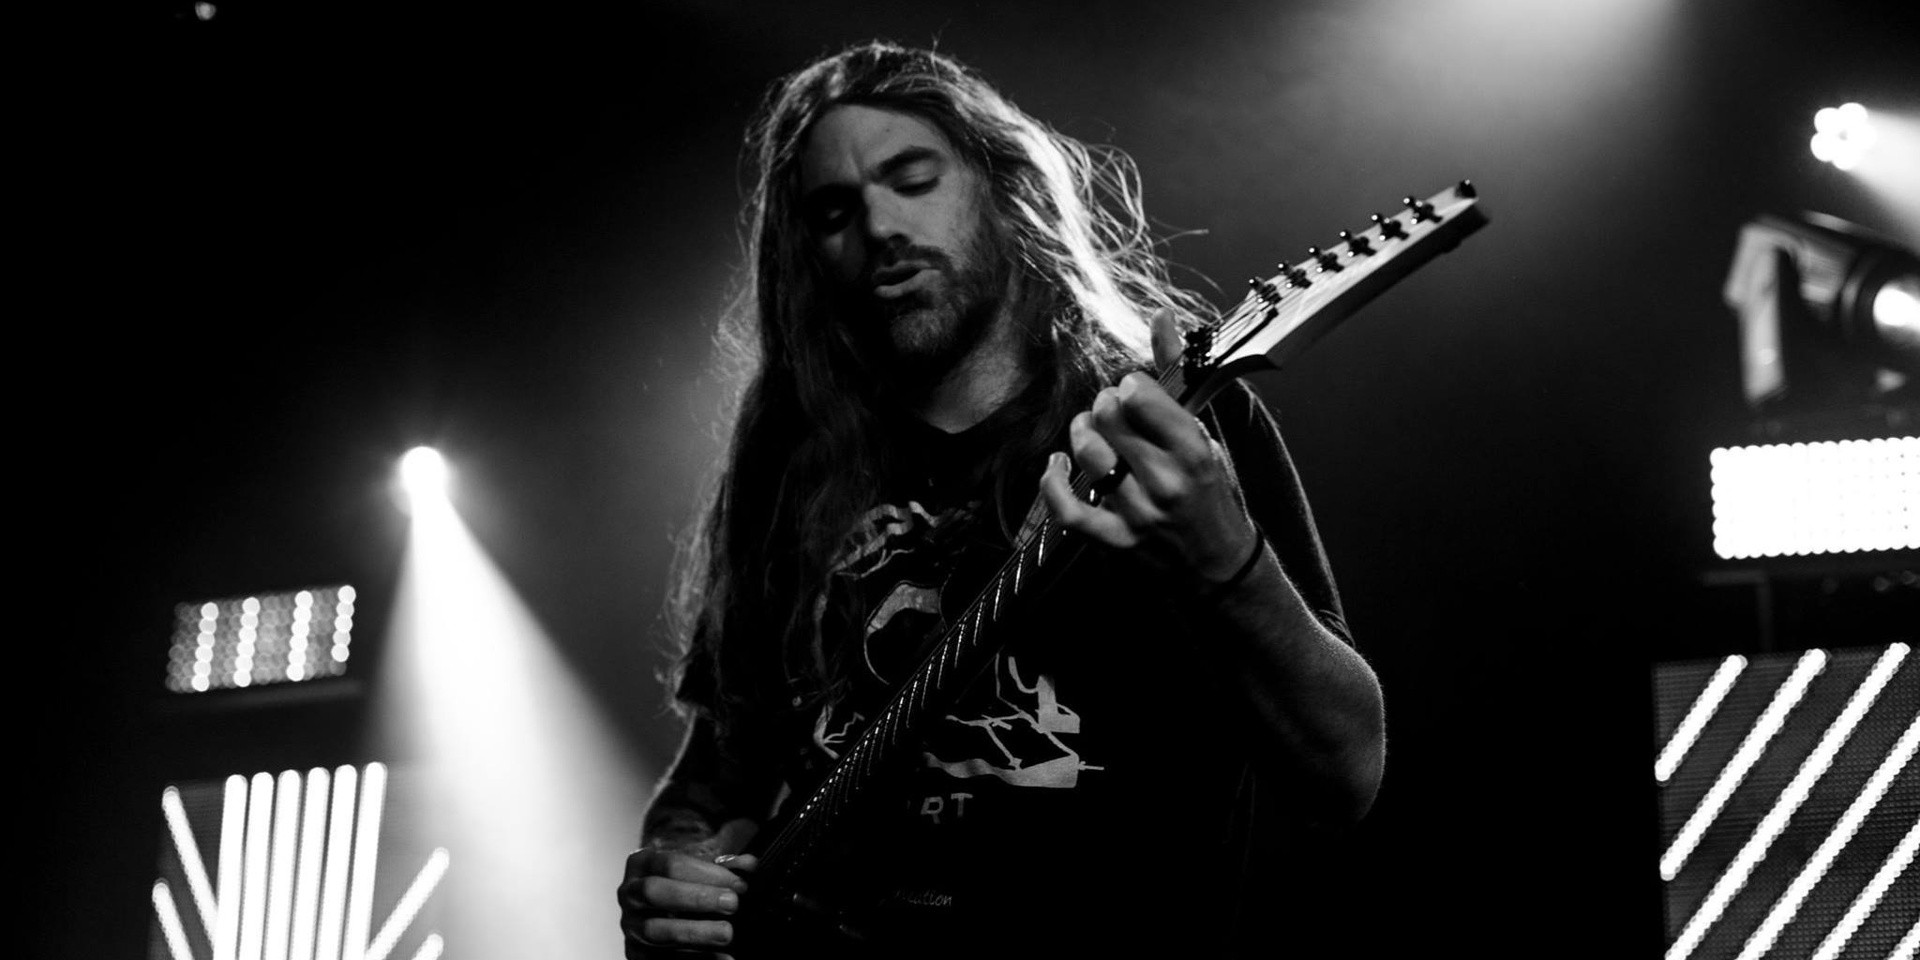 Between The Buried And Me's Paul Waggoner will hold a guitar clinic in Singapore